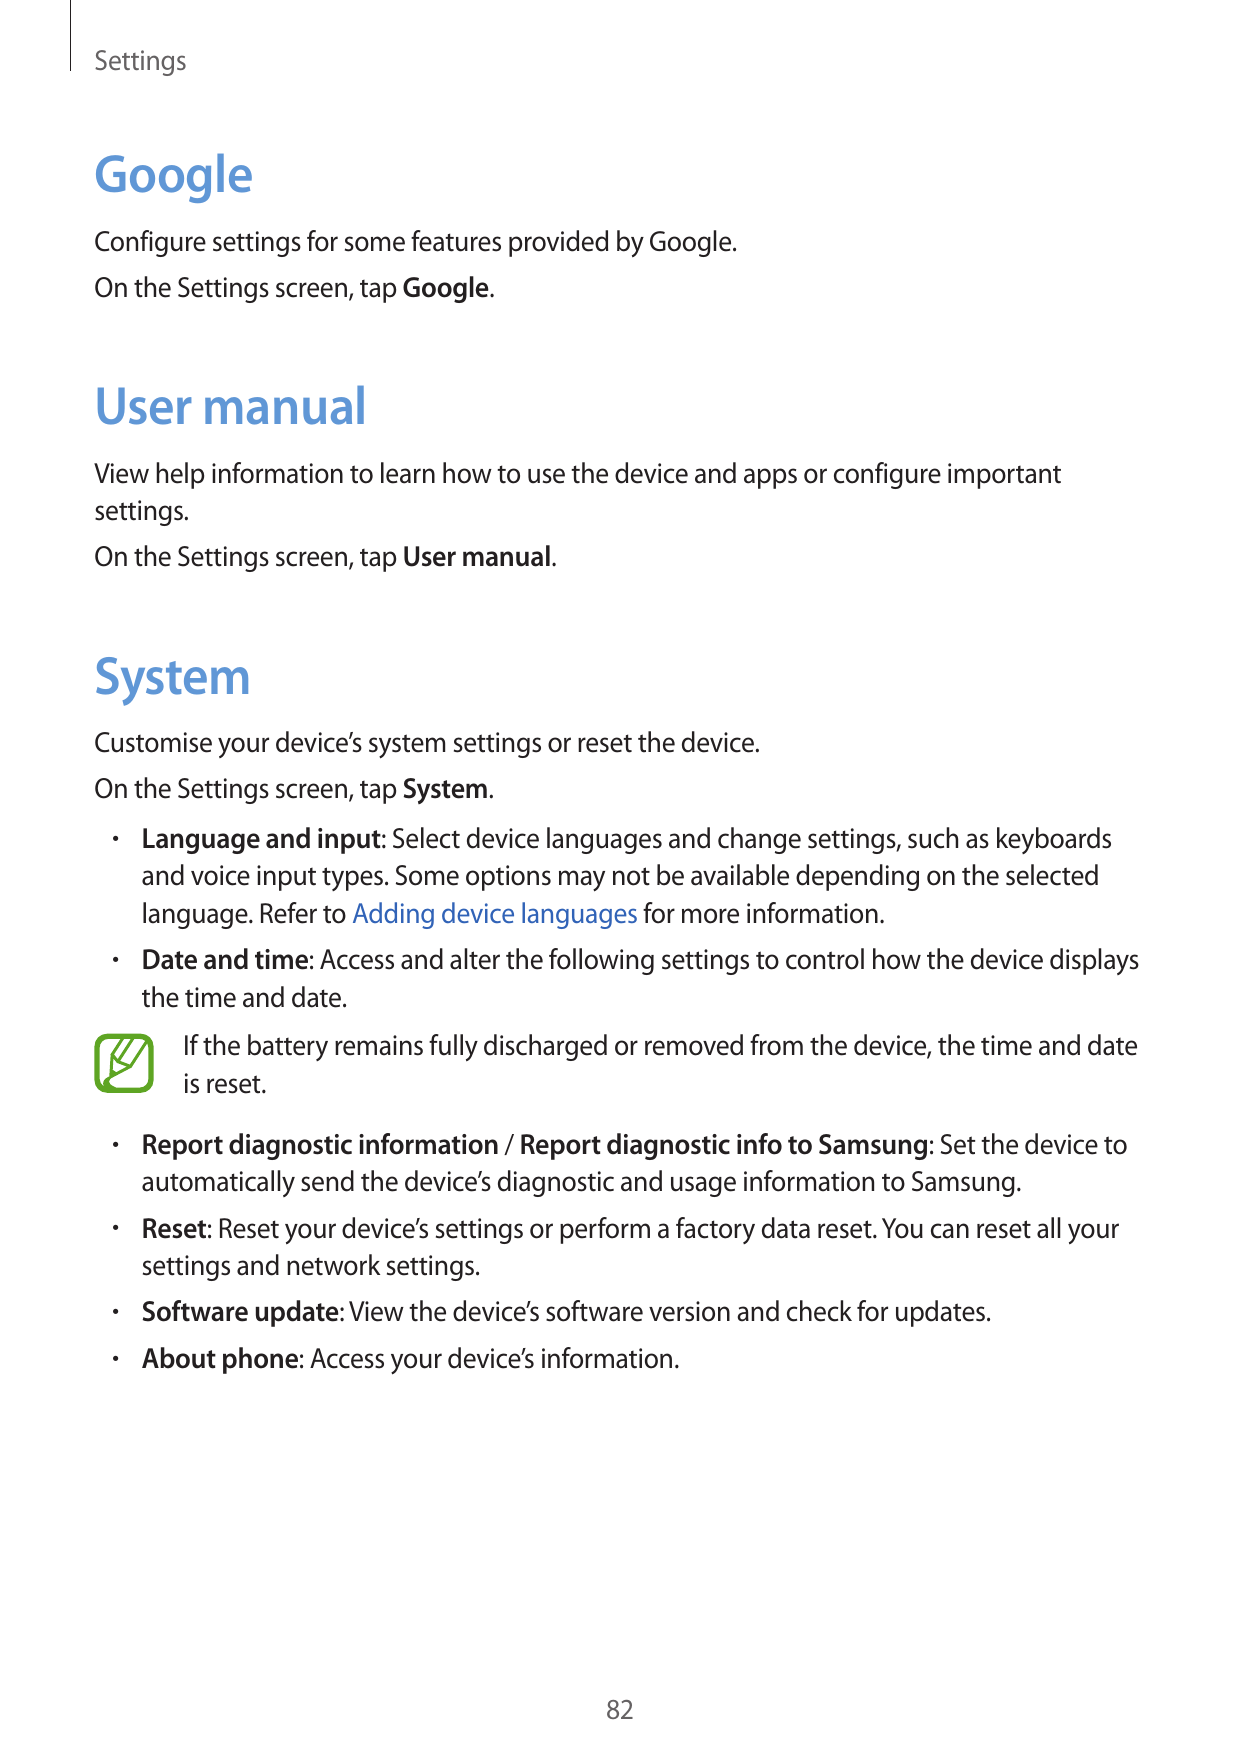 SettingsGoogleConfigure settings for some features provided by Google.On the Settings screen, tap Google.User manualView help in